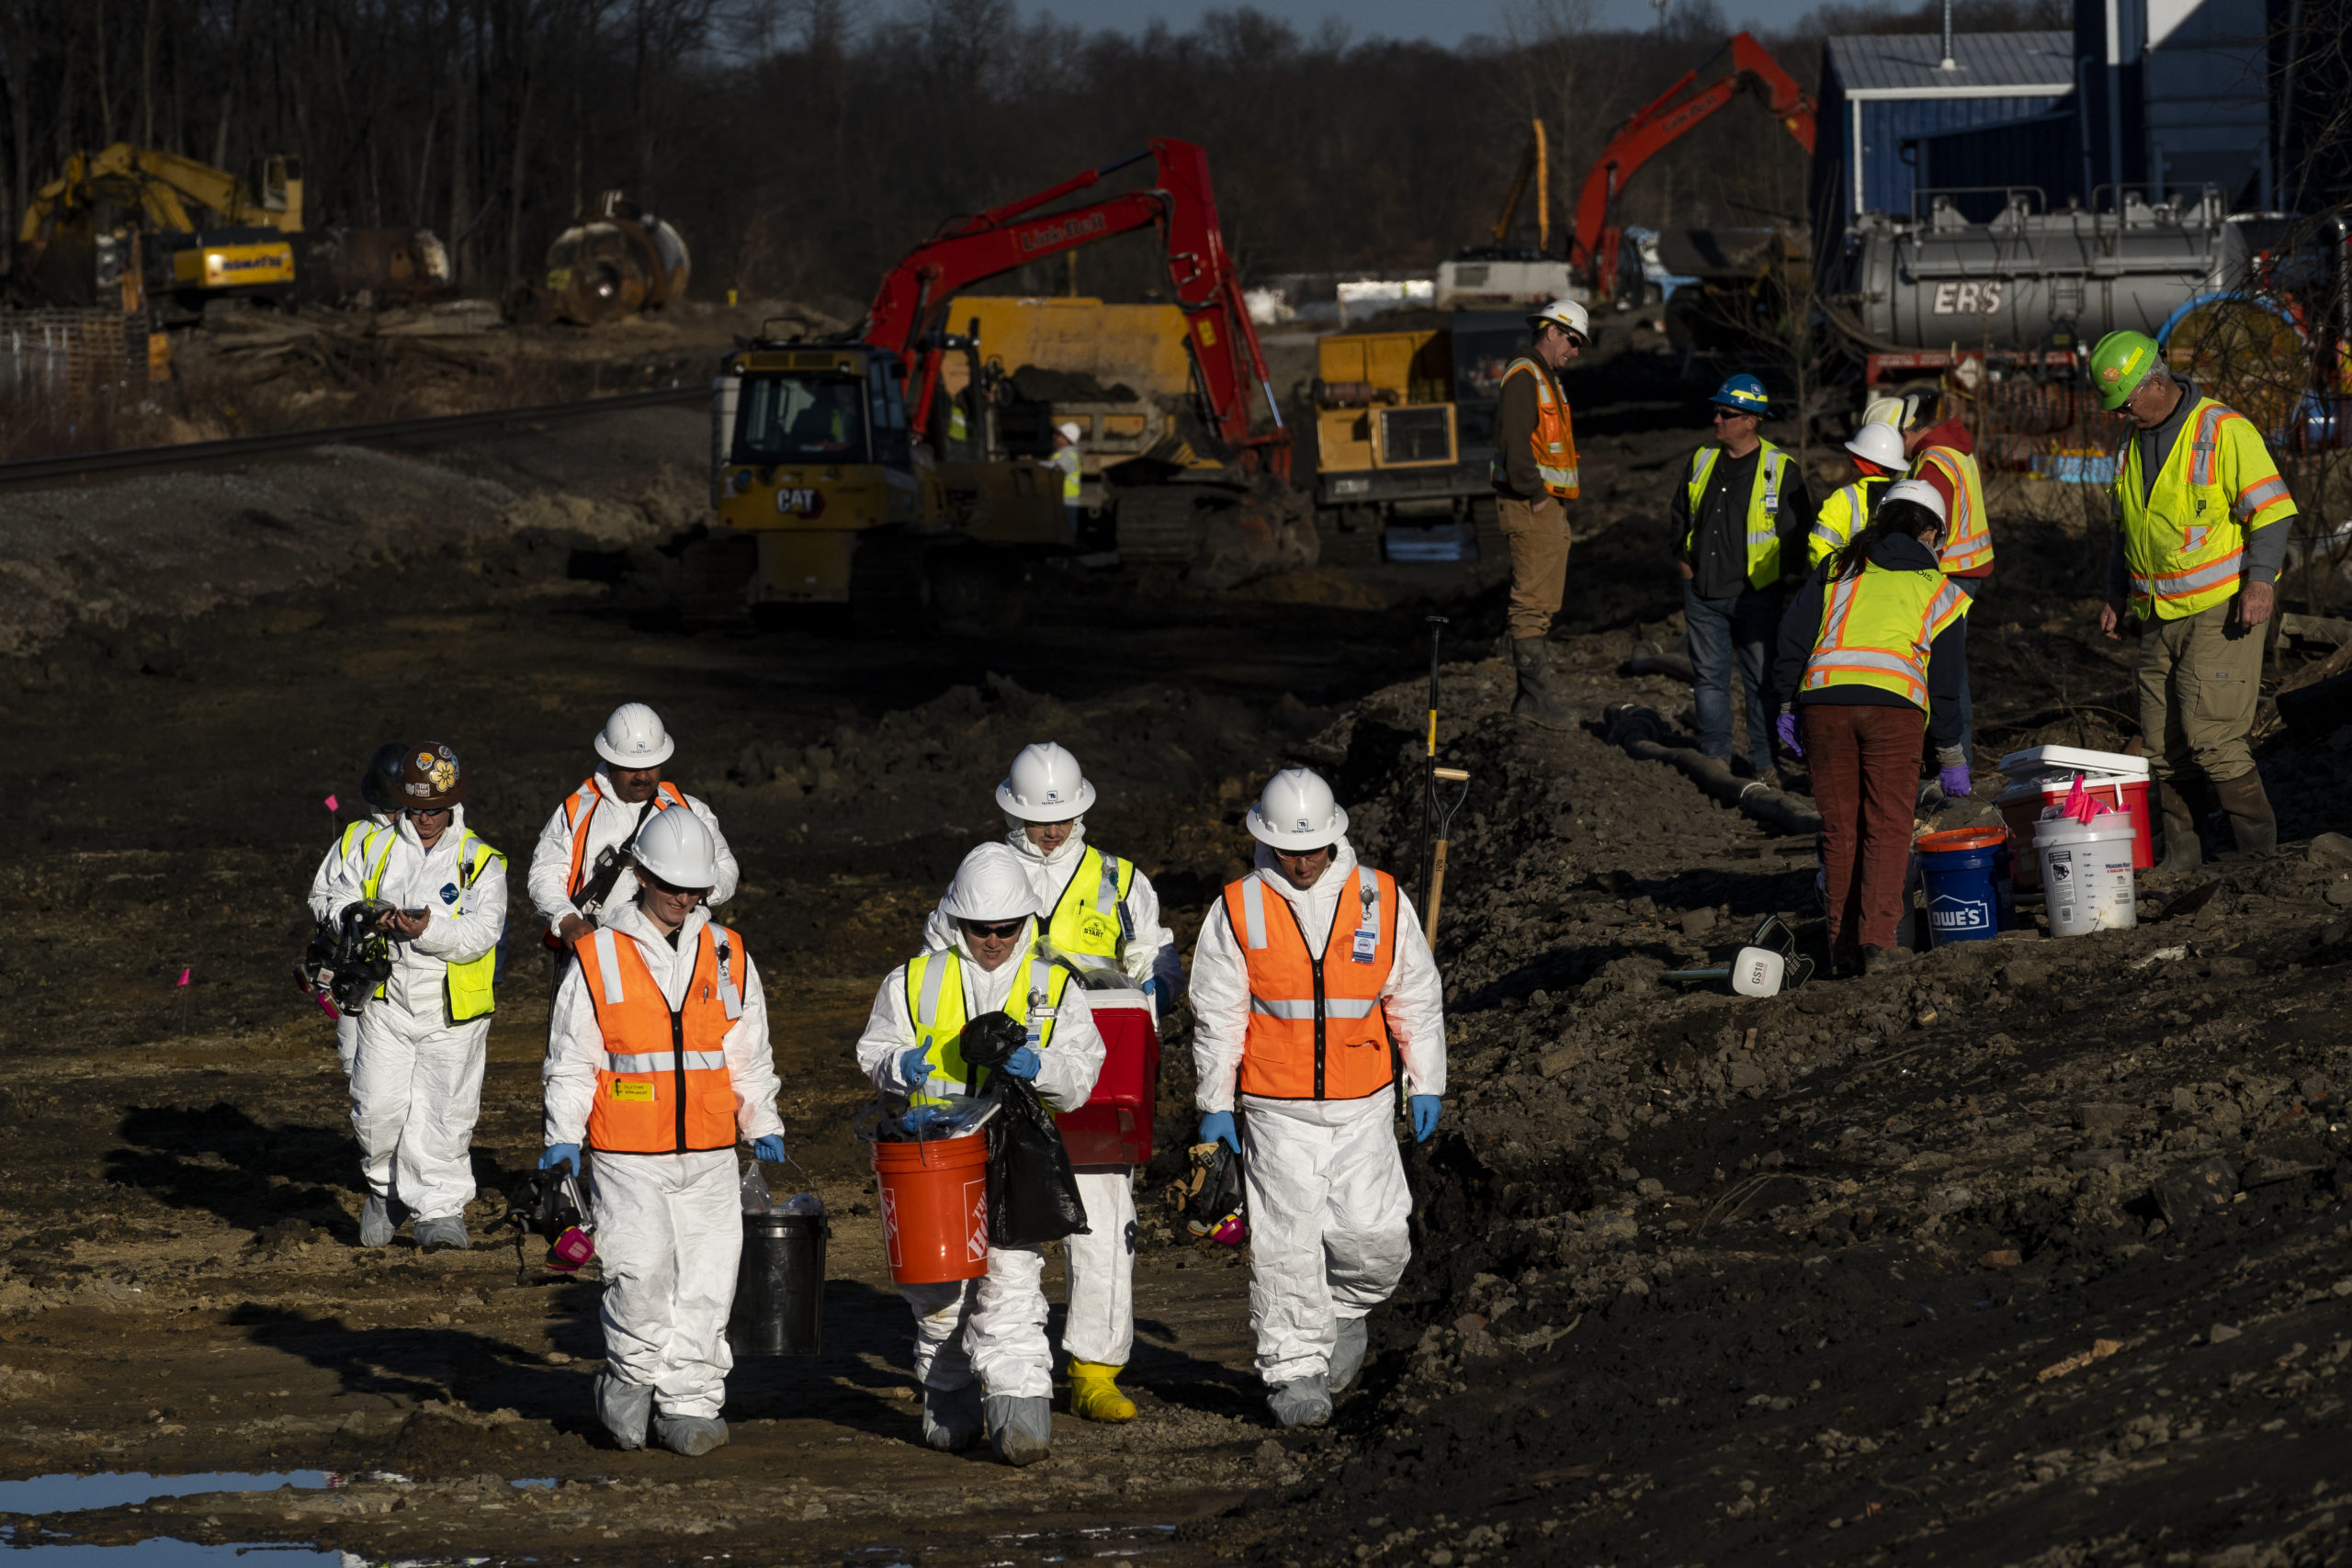 Ohio EPA and EPA contractors collect soil and air samples from the derailment site on March 9, 2023 in East Palestine, Ohio. Cleanup efforts continue after a Norfolk Southern train carrying toxic chemicals derailed causing an environmental disaster. Thousands of residents were ordered to evacuate after the area was placed under a state of emergency and temporary evacuation orders. (Photo by Michael Swensen/Getty Images)